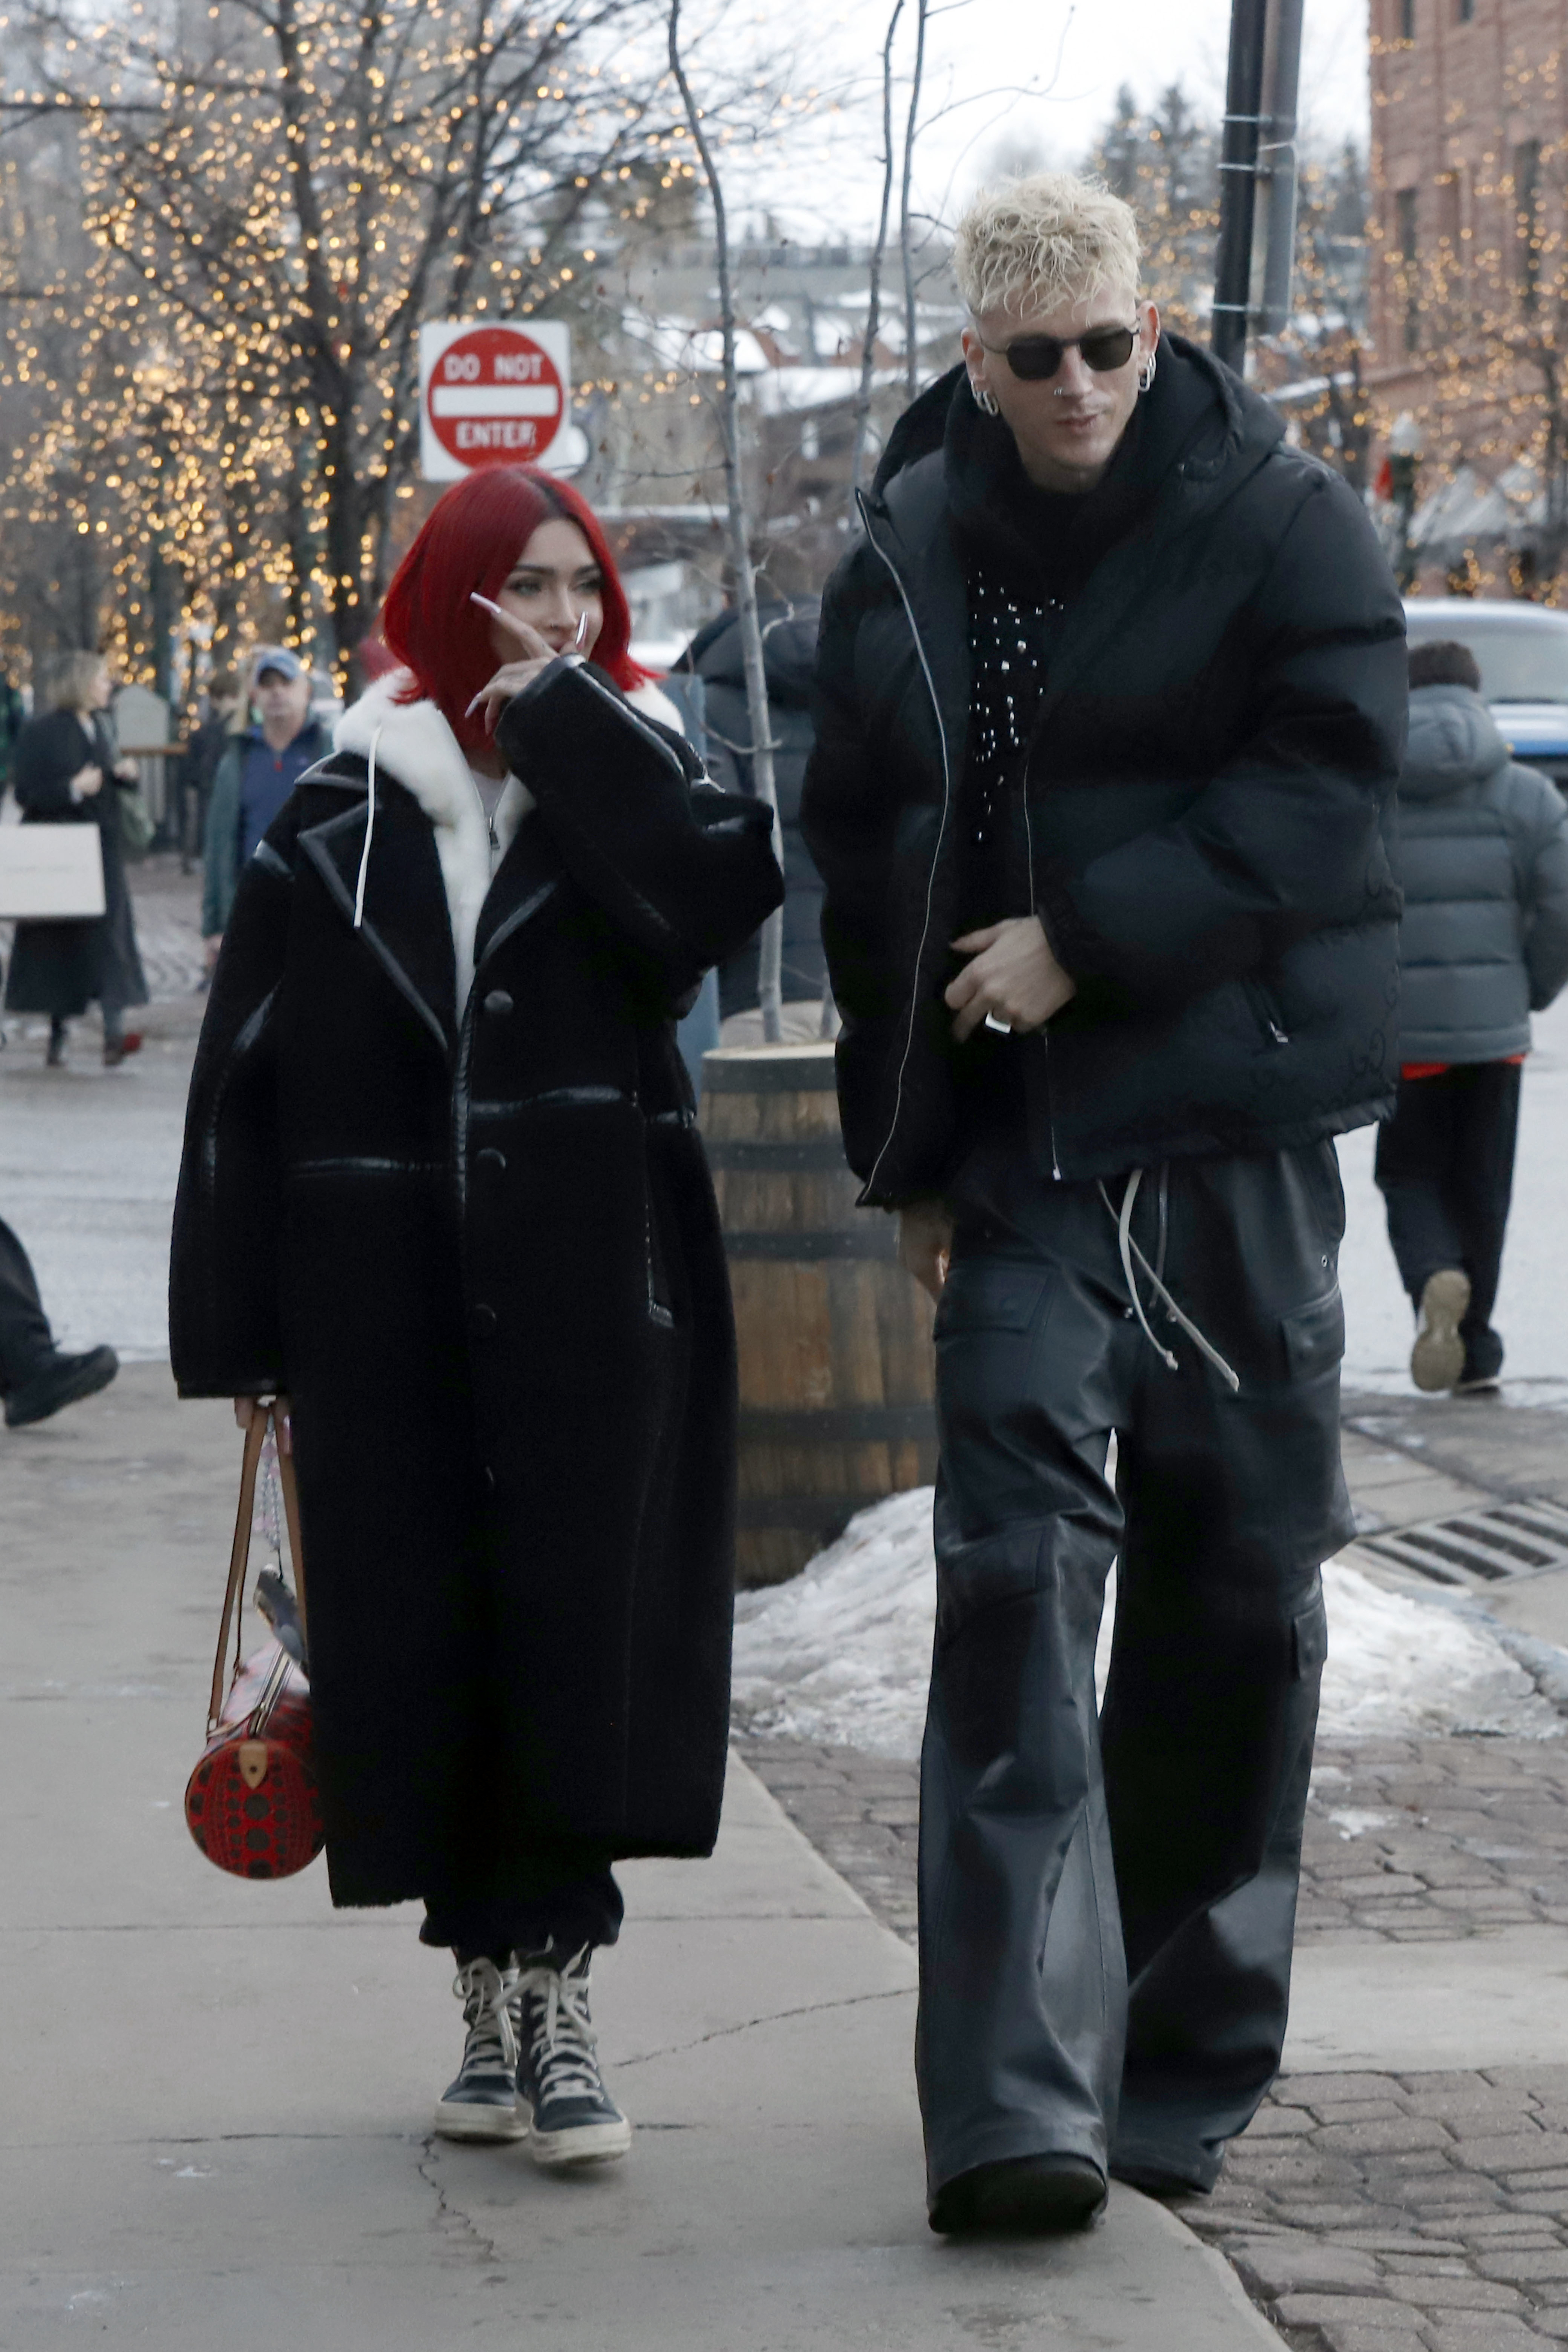 Megan in a long coat with a trim walking on the street with MGK who&#x27;s wearing a puffy jacket and sunglasses